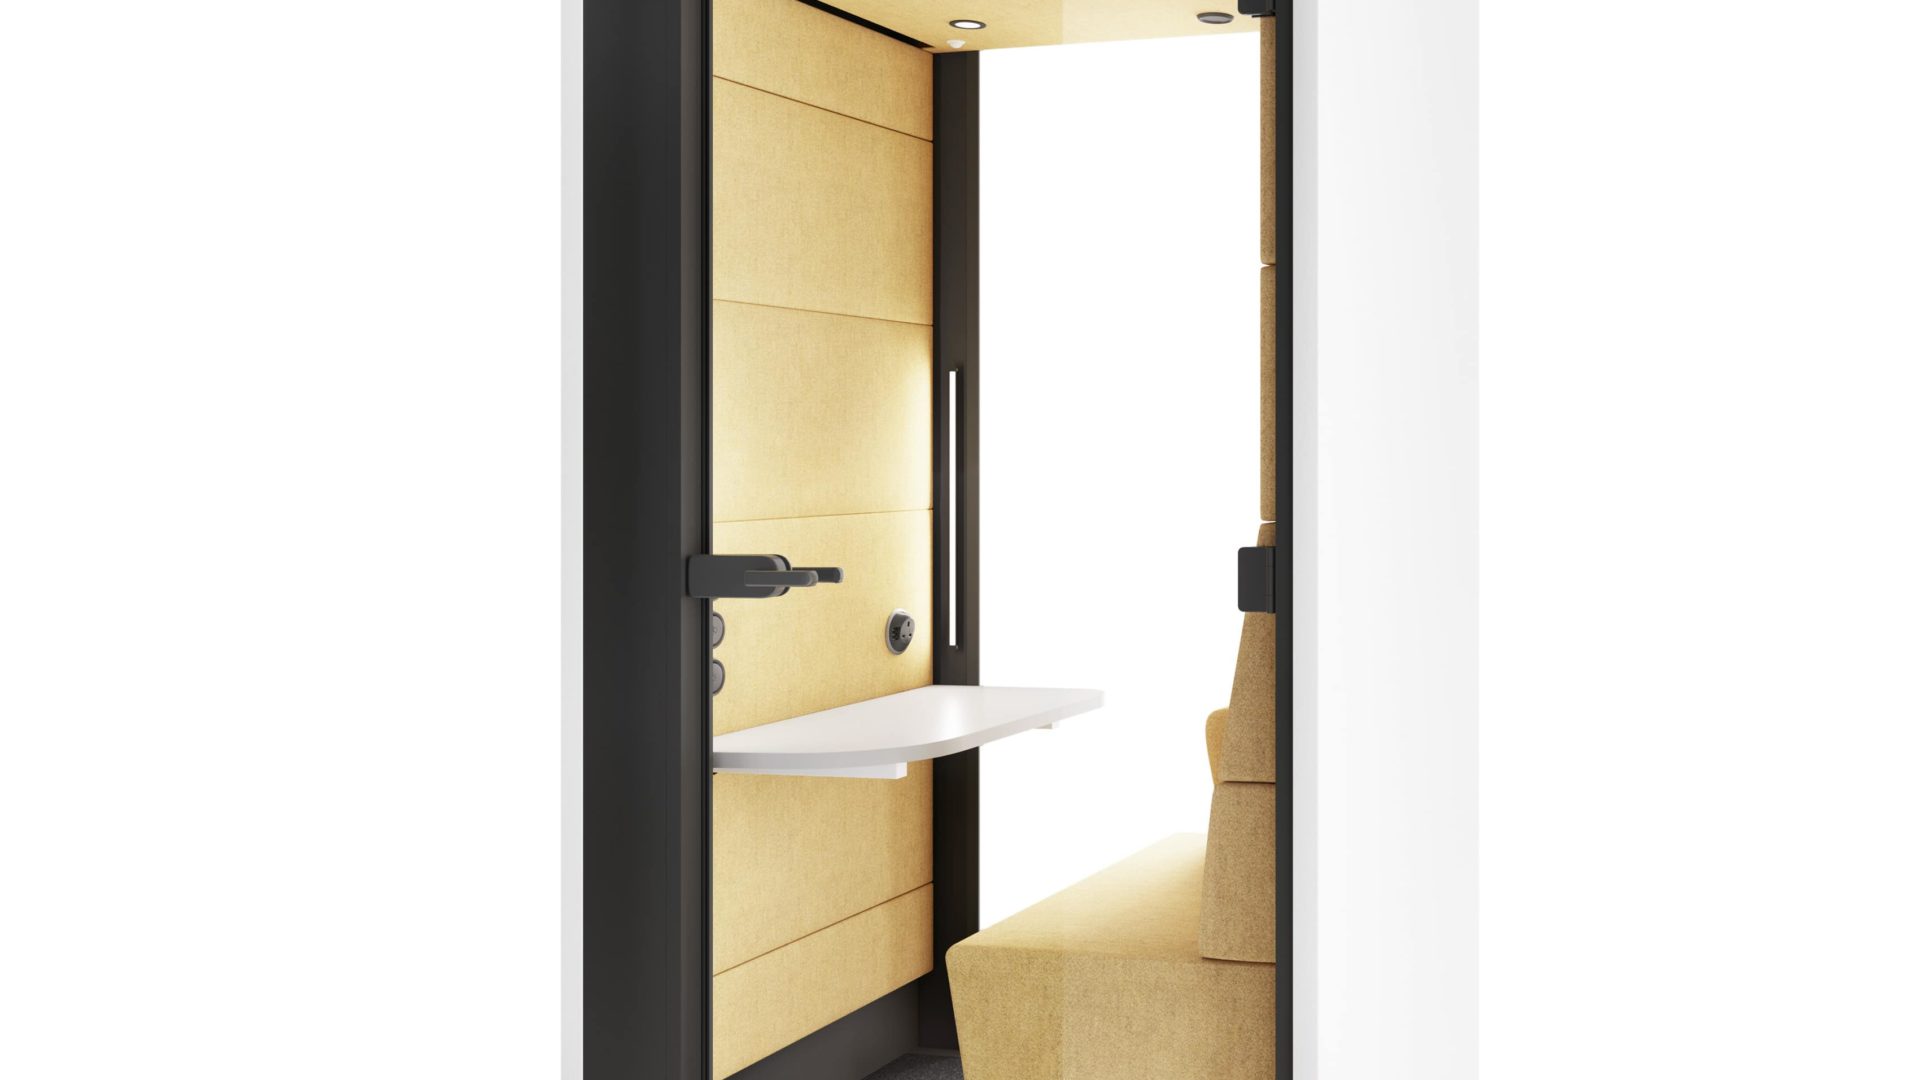 HushHybrid acoustic office booth for video calls.